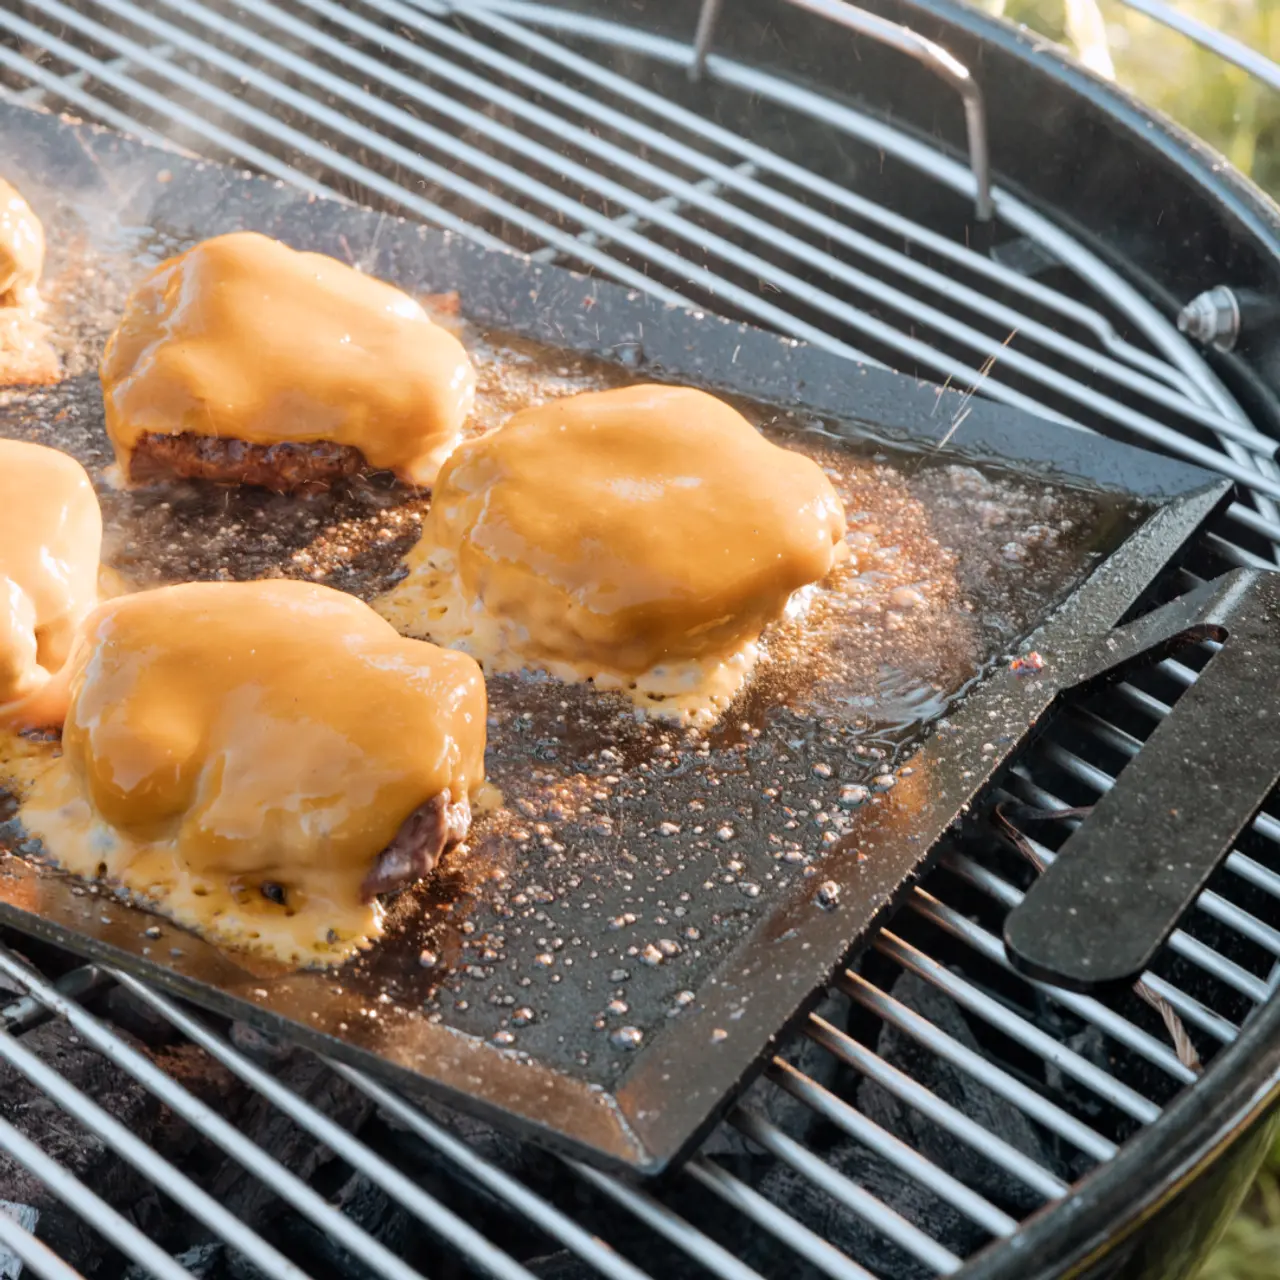 Juicy cheese-topped burgers sizzle on a flat grilling surface with a barbecue in the background.